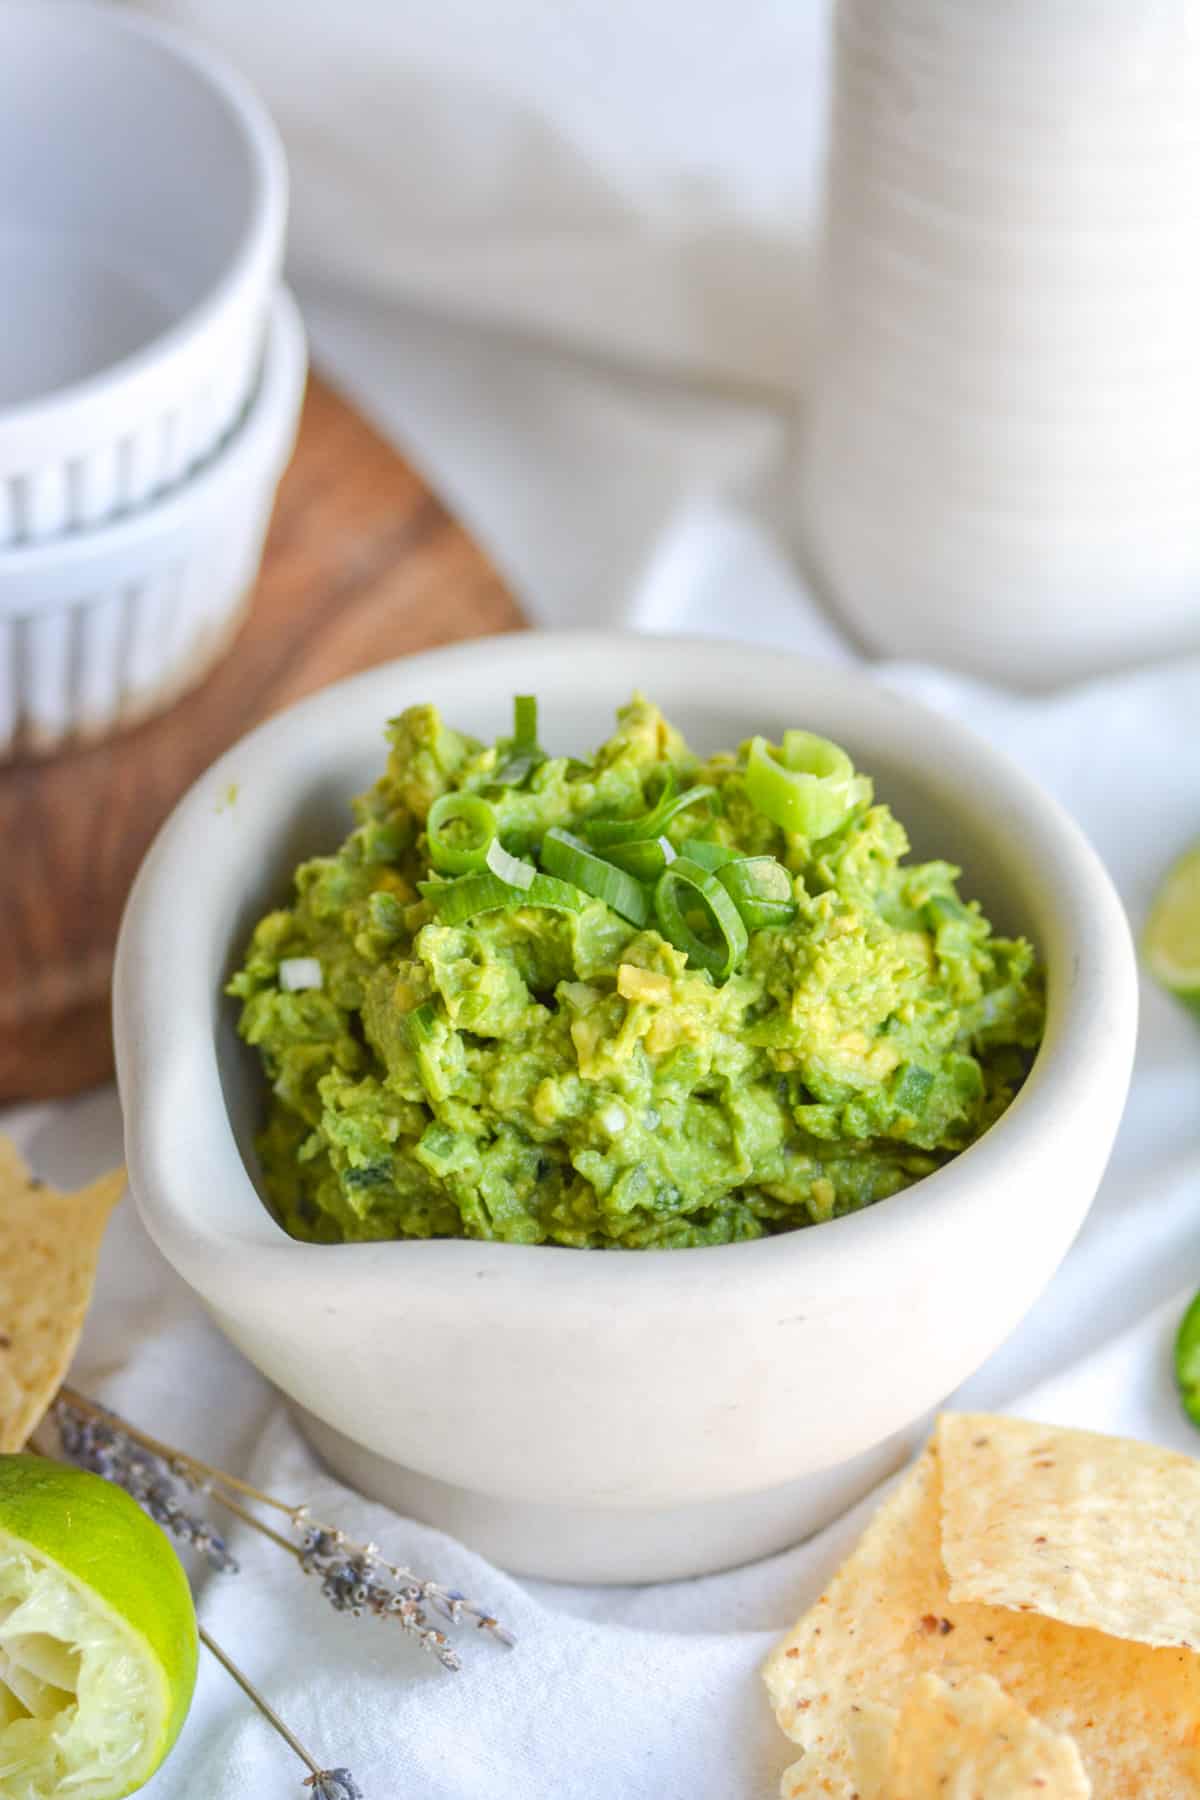 Simple 4 ingredient guacamole in a small bowl with tortilla chips in the foreground.